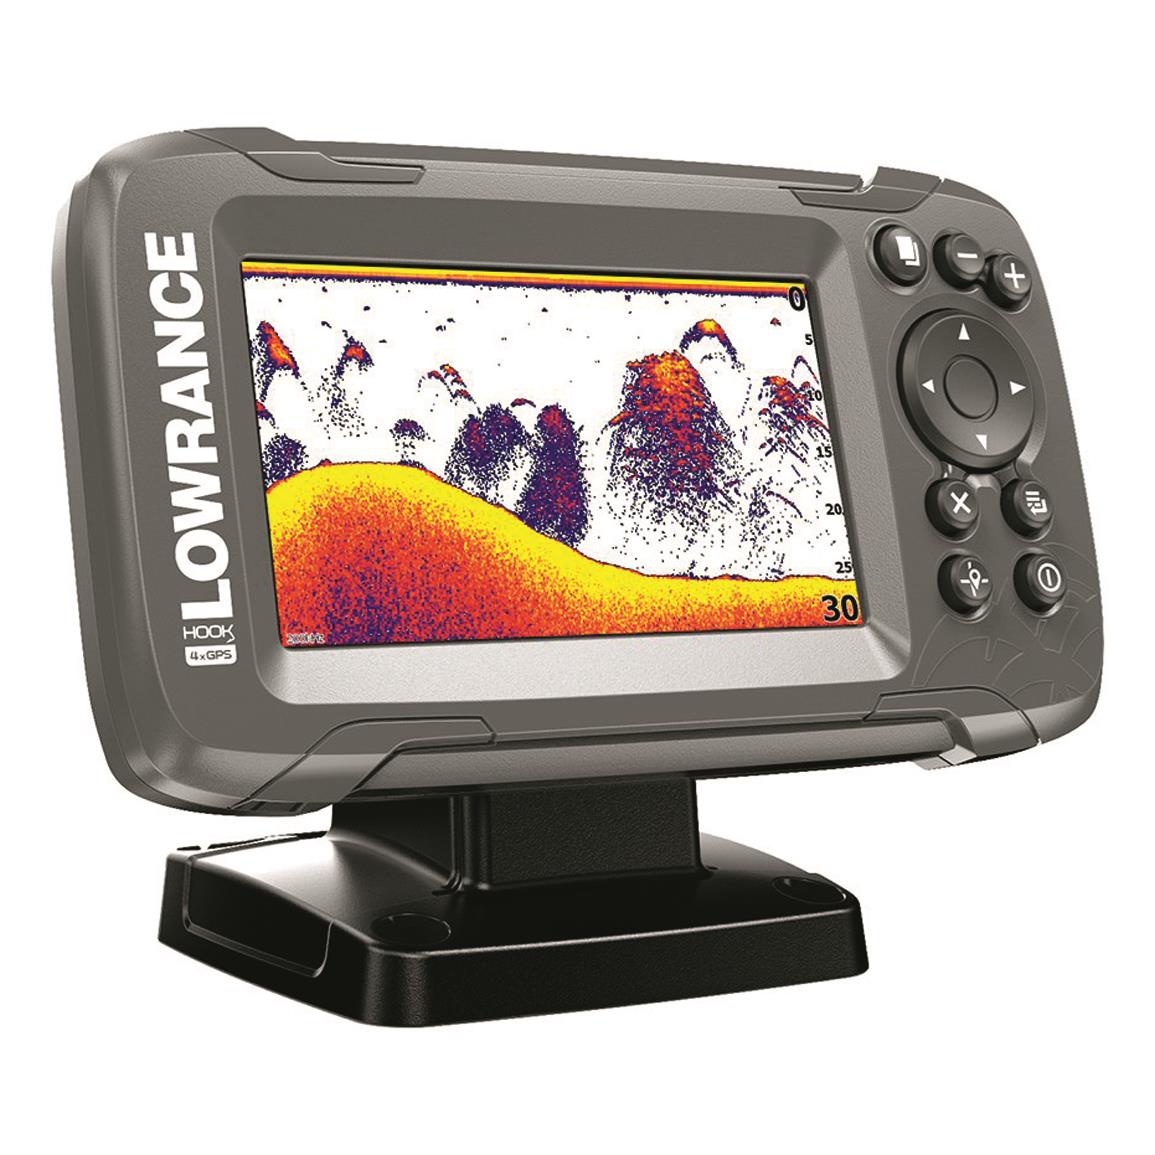 lowrance-hook2-4x-fish-finder-gps-reviews